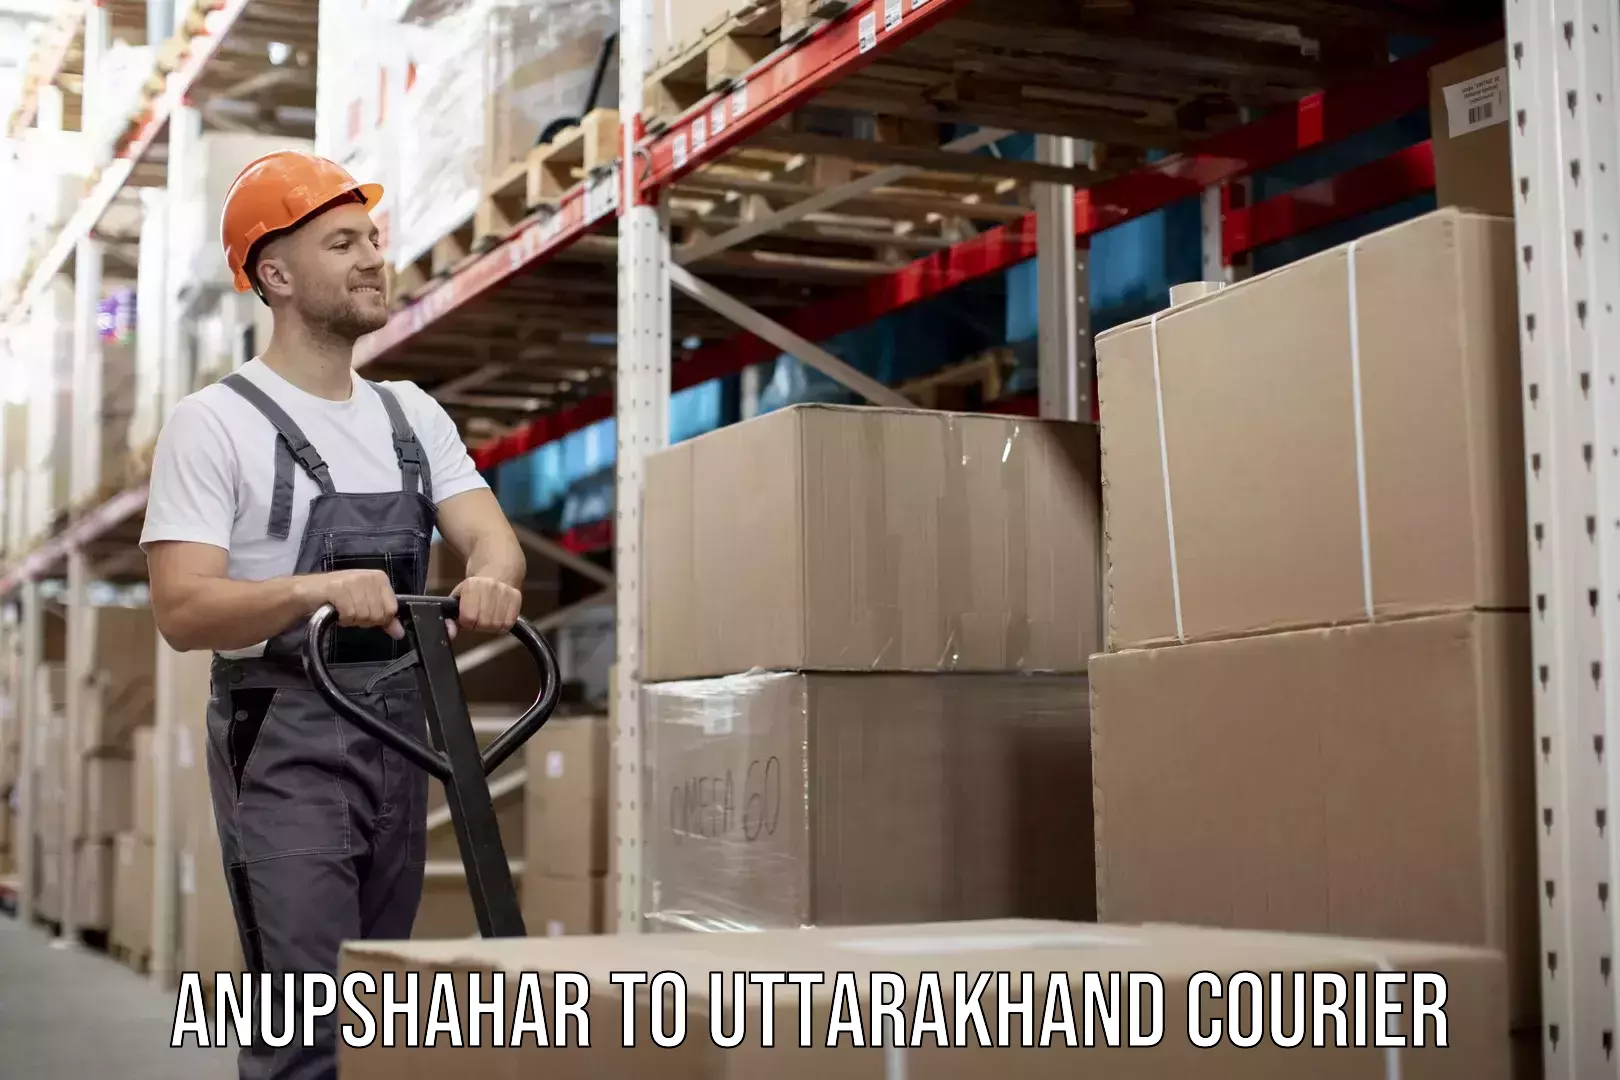 User-friendly delivery service Anupshahar to Uttarakhand